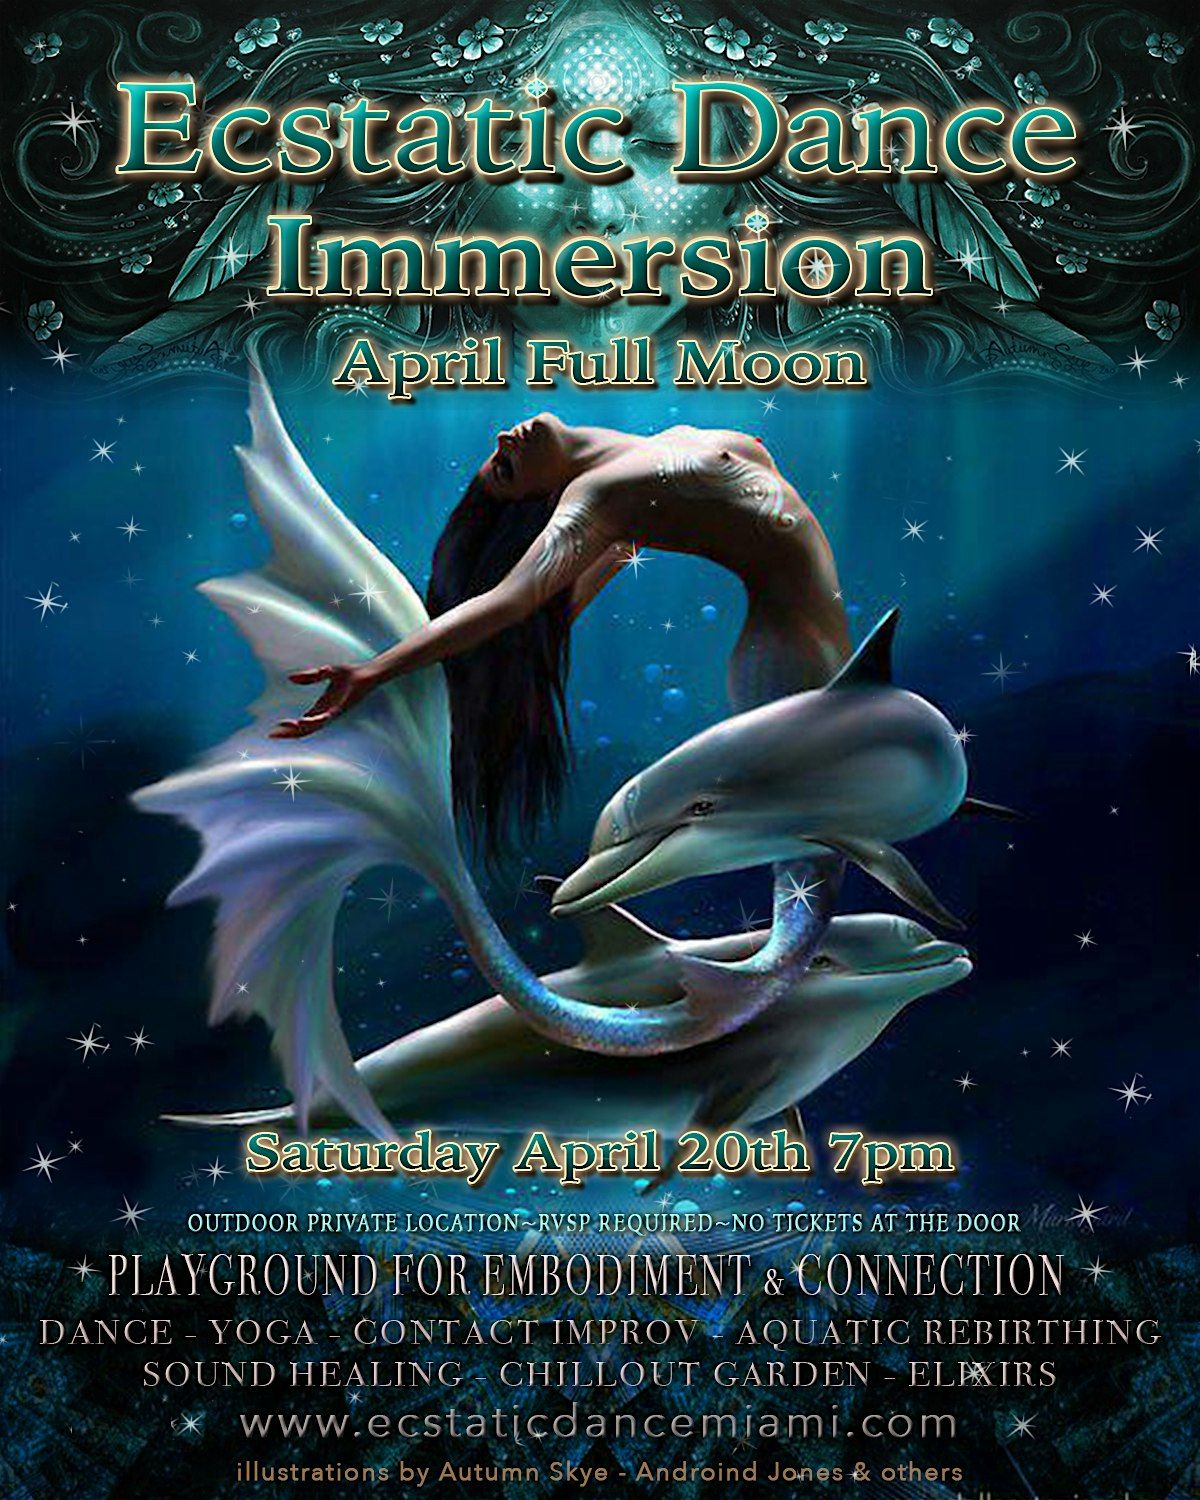 Ecstatic Dance Miami ~ March Full Moon Immersion